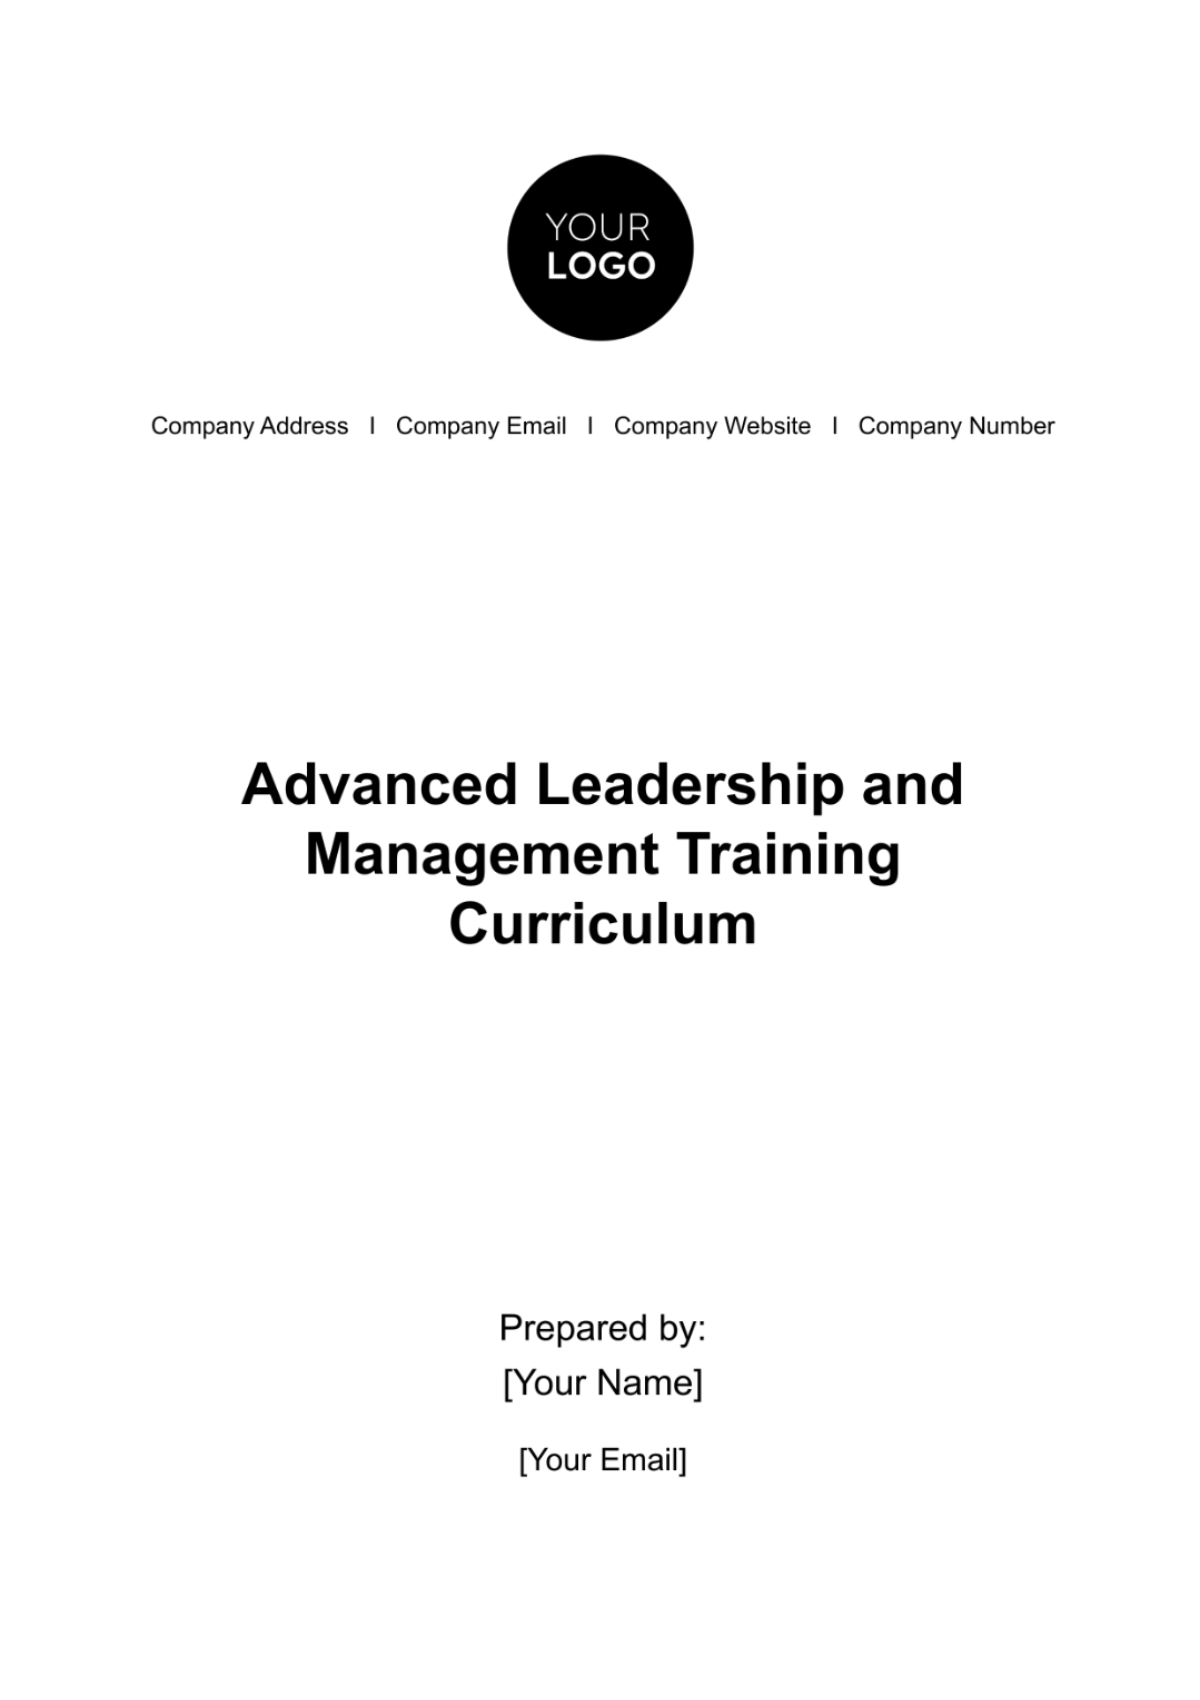 Free Advanced Leadership and Management Training Curriculum HR Template